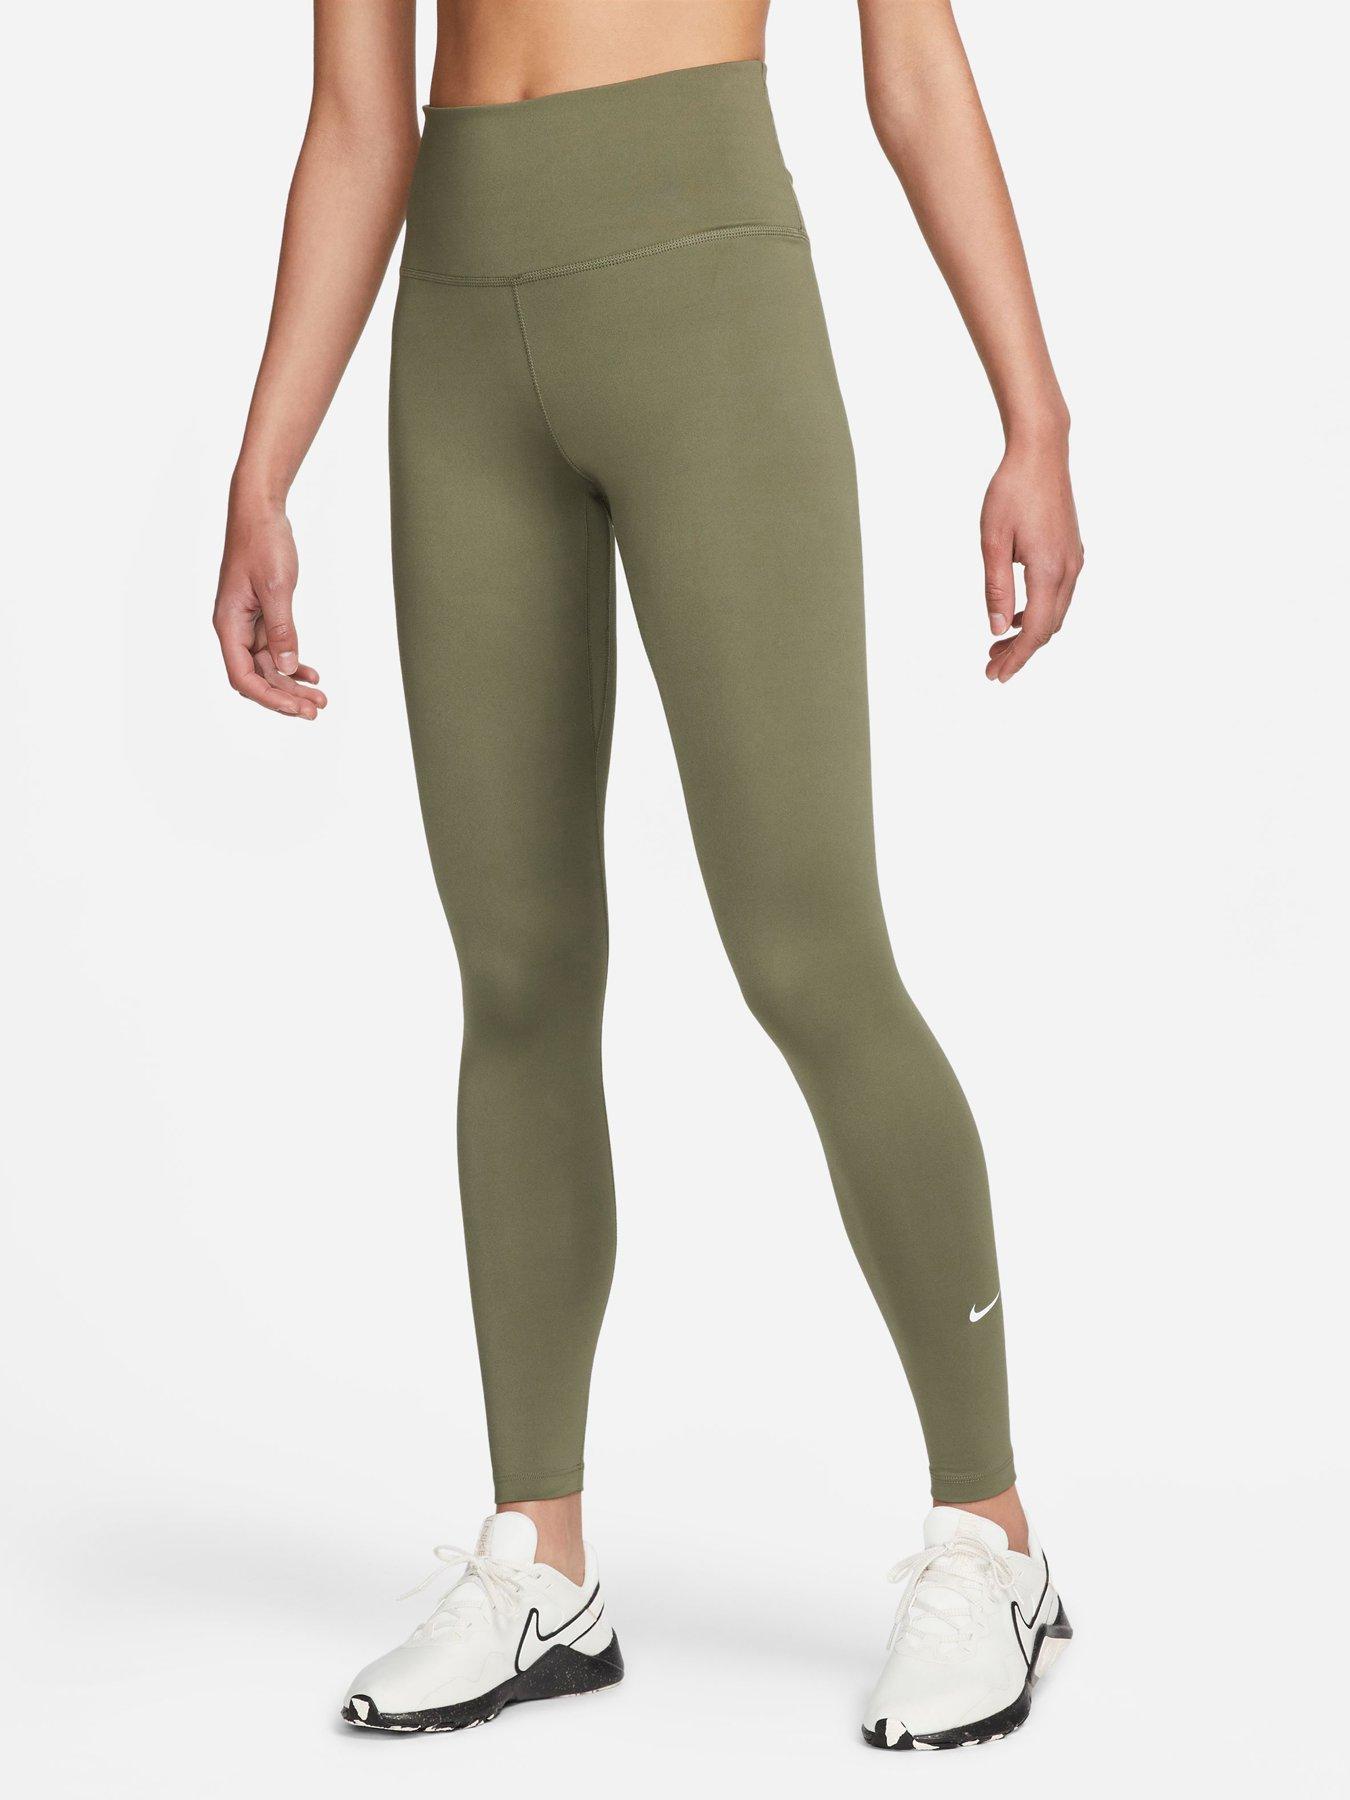 Old Navy Solid Green Leggings Size L (Tall) - 20% off